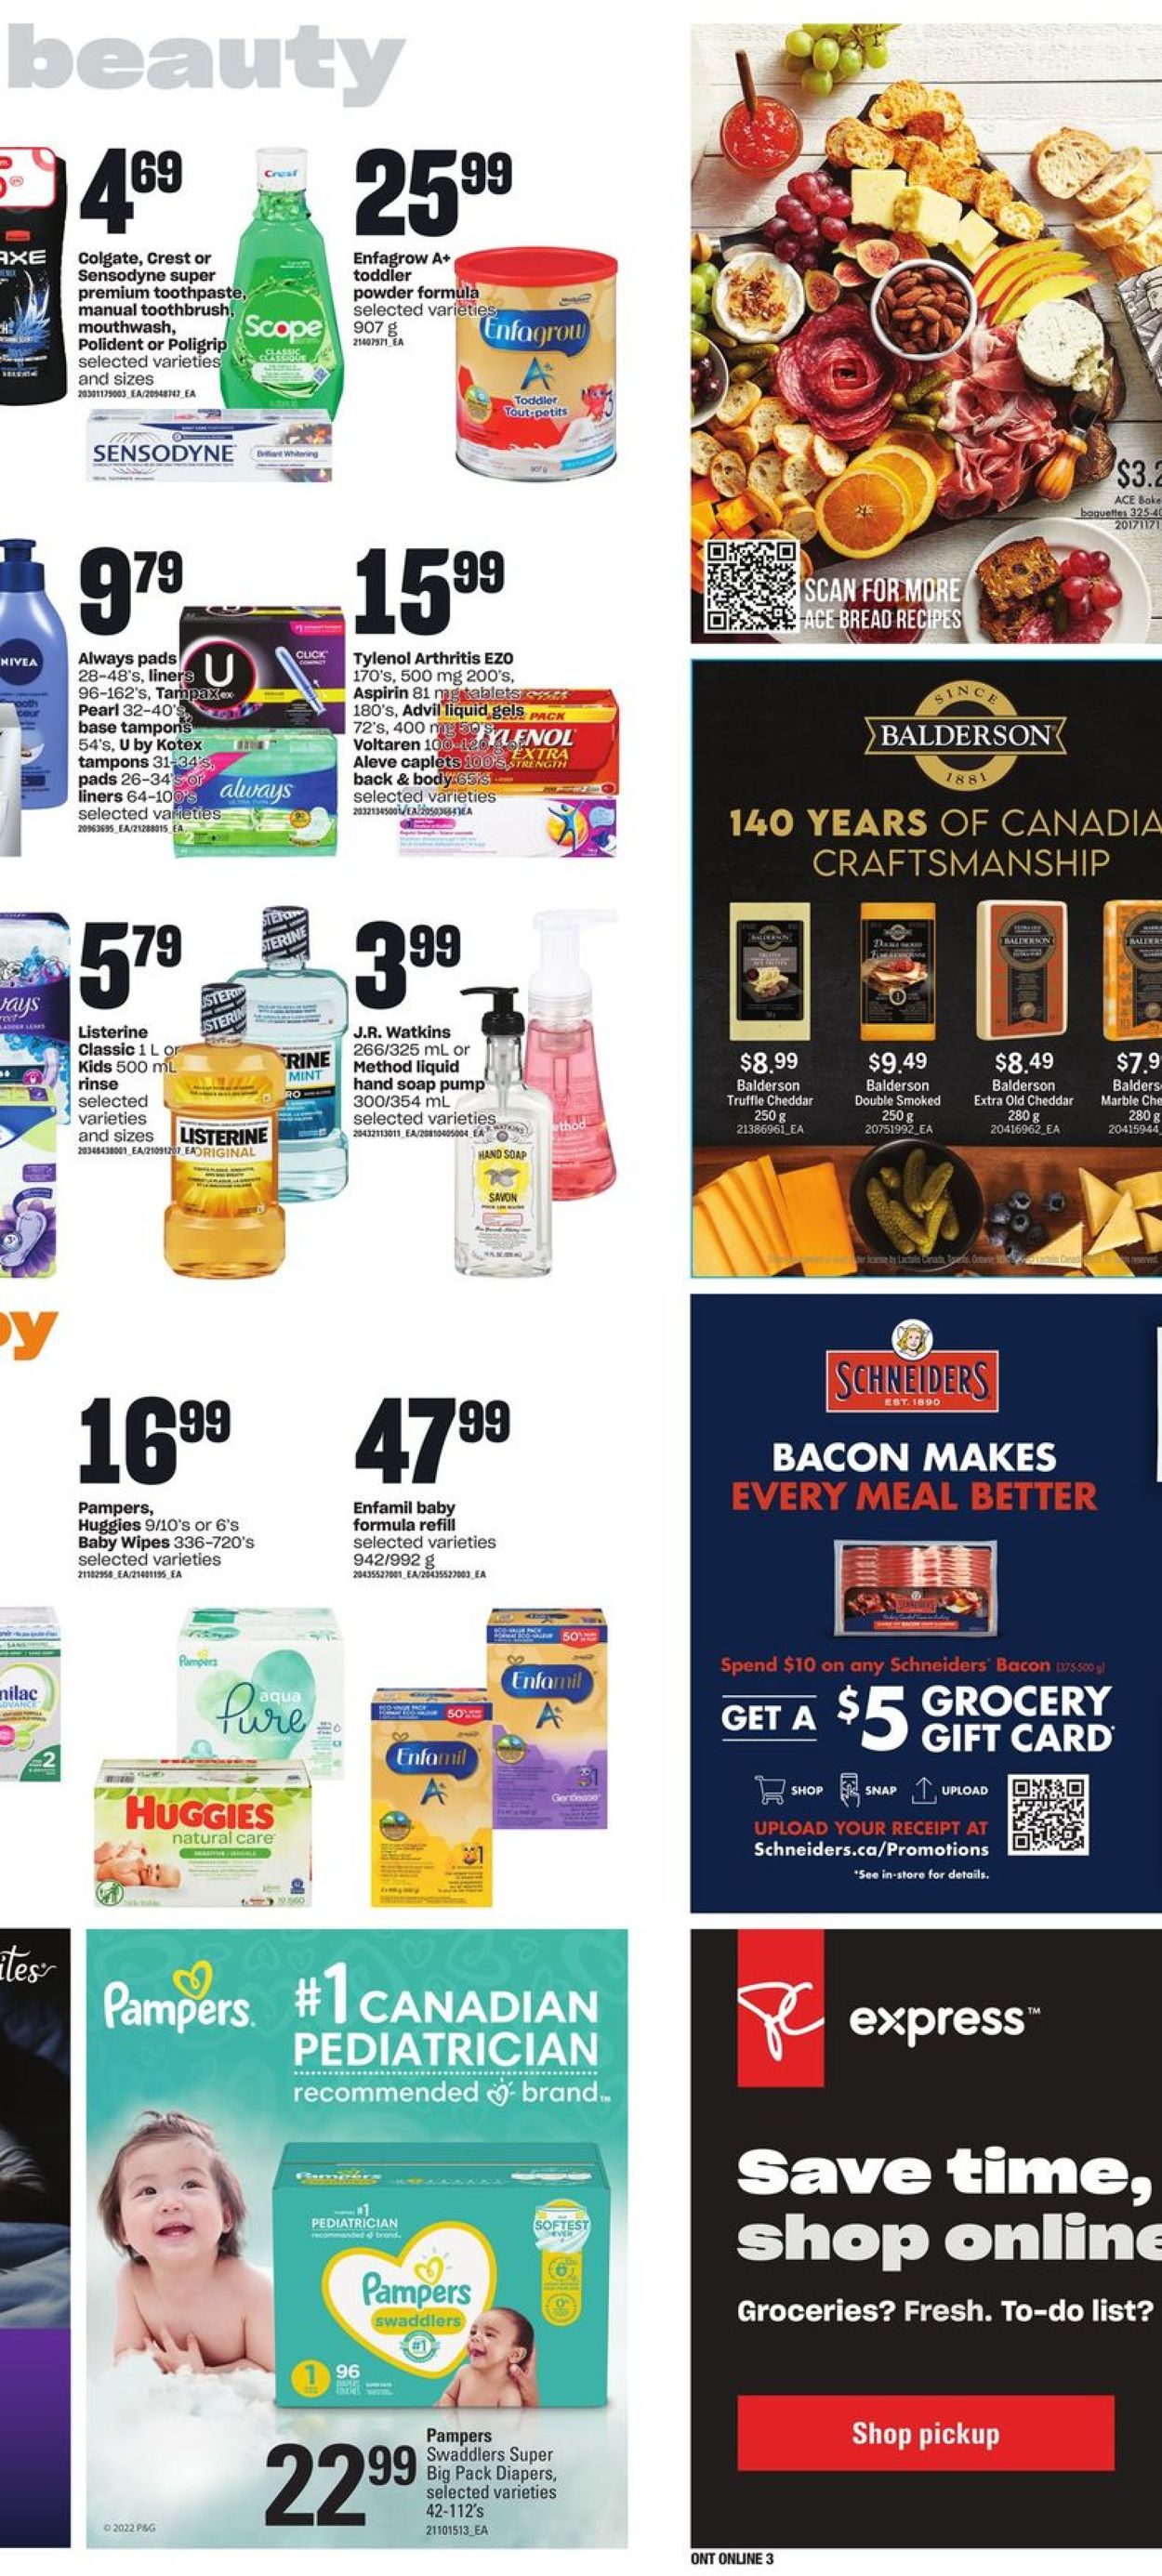 Zehrs Flyer from 04/07/2022